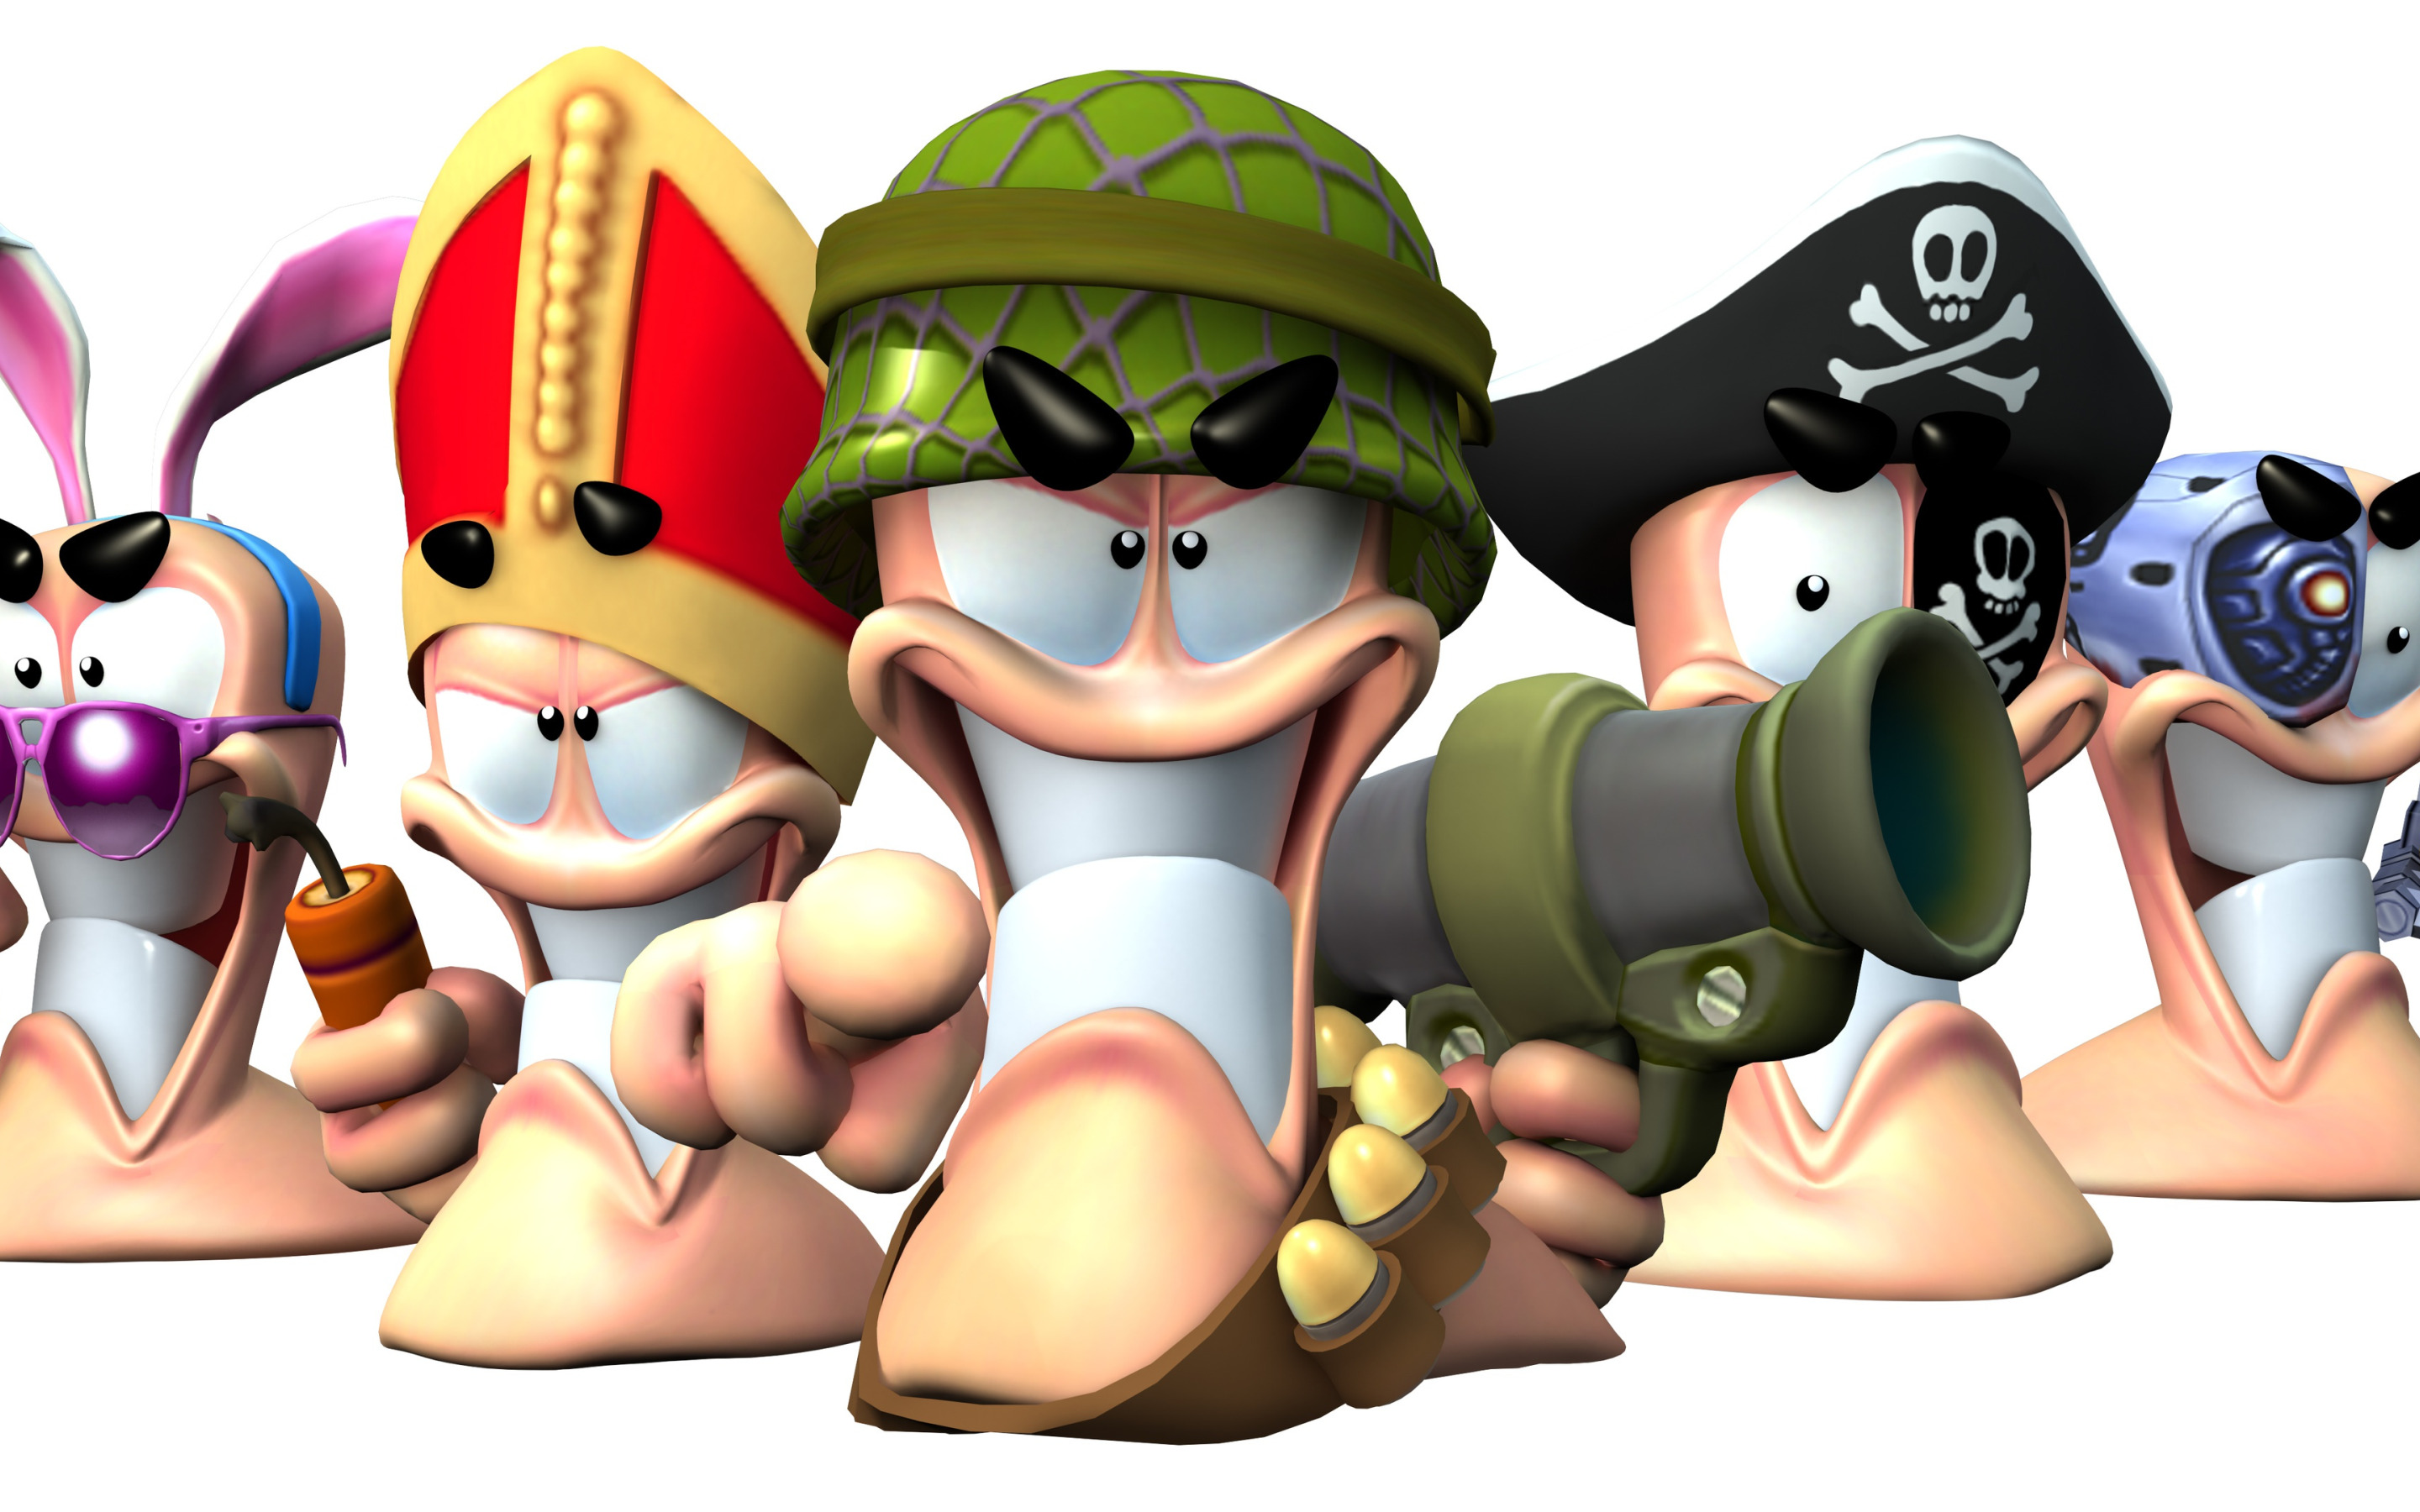 Worms clan